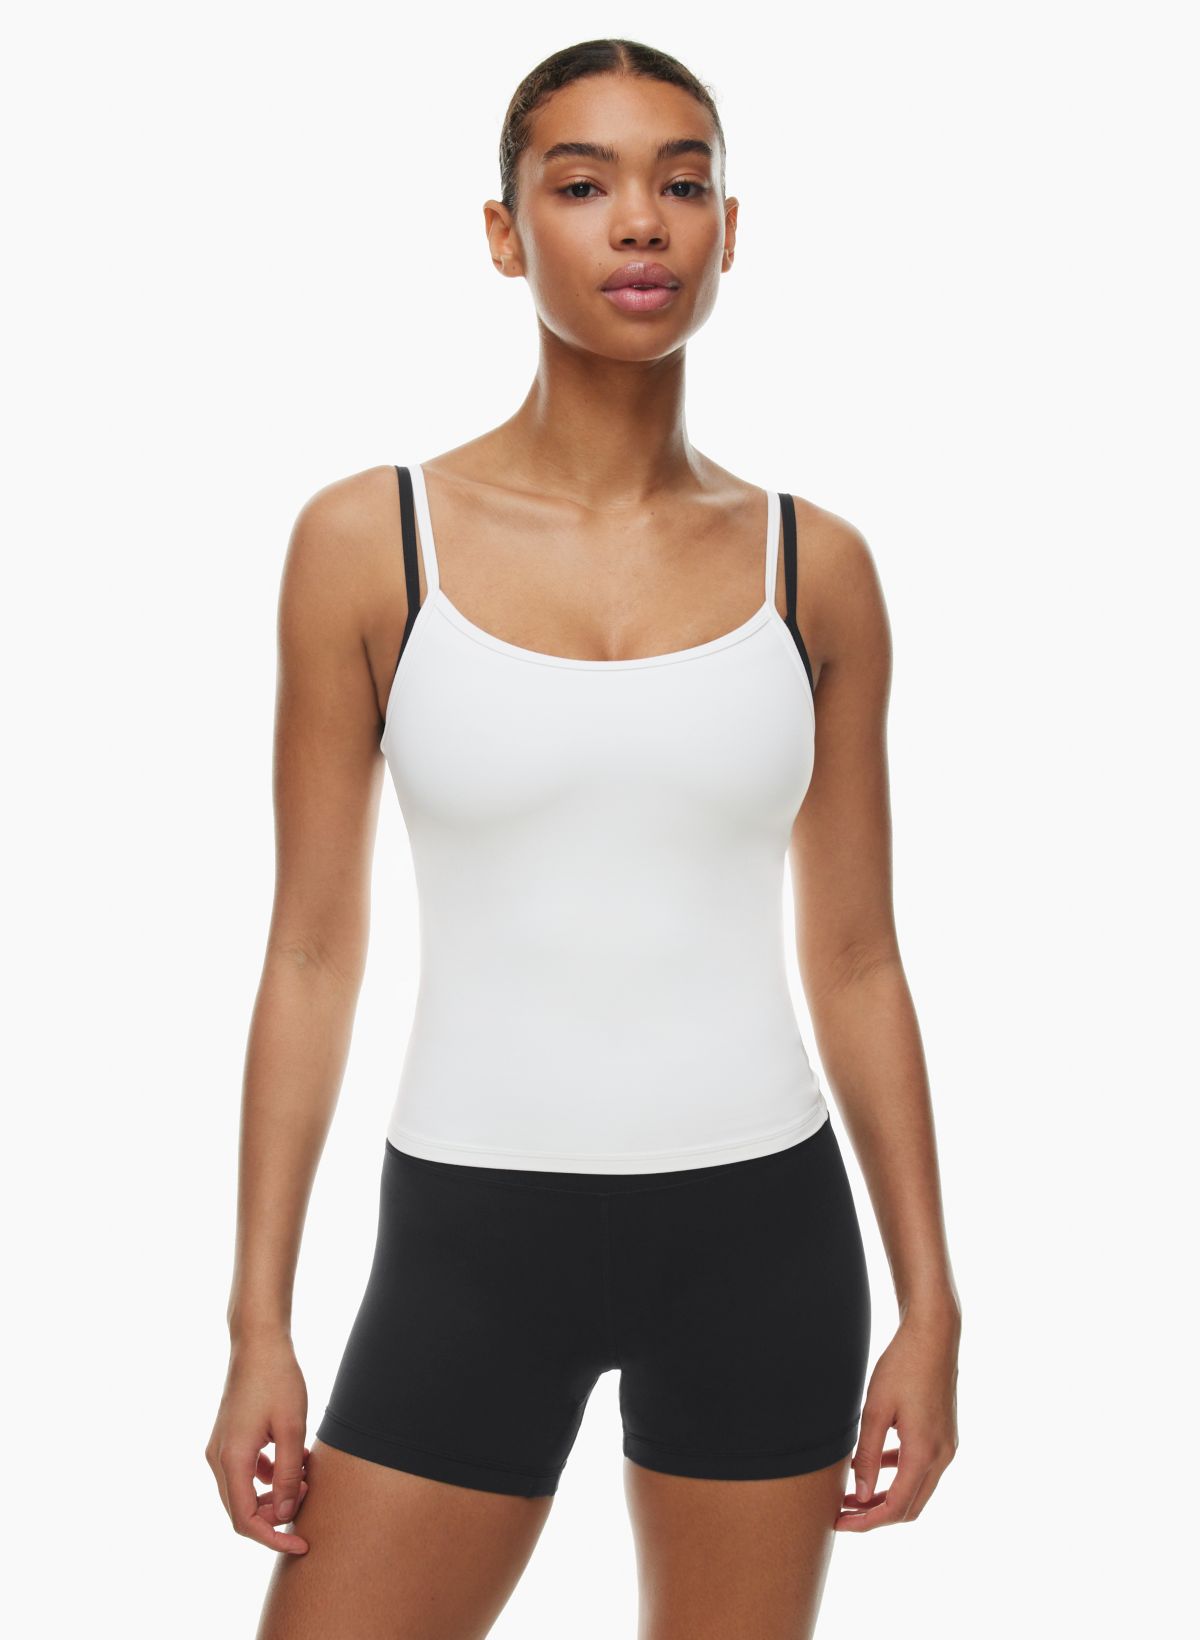 butter essential camisole